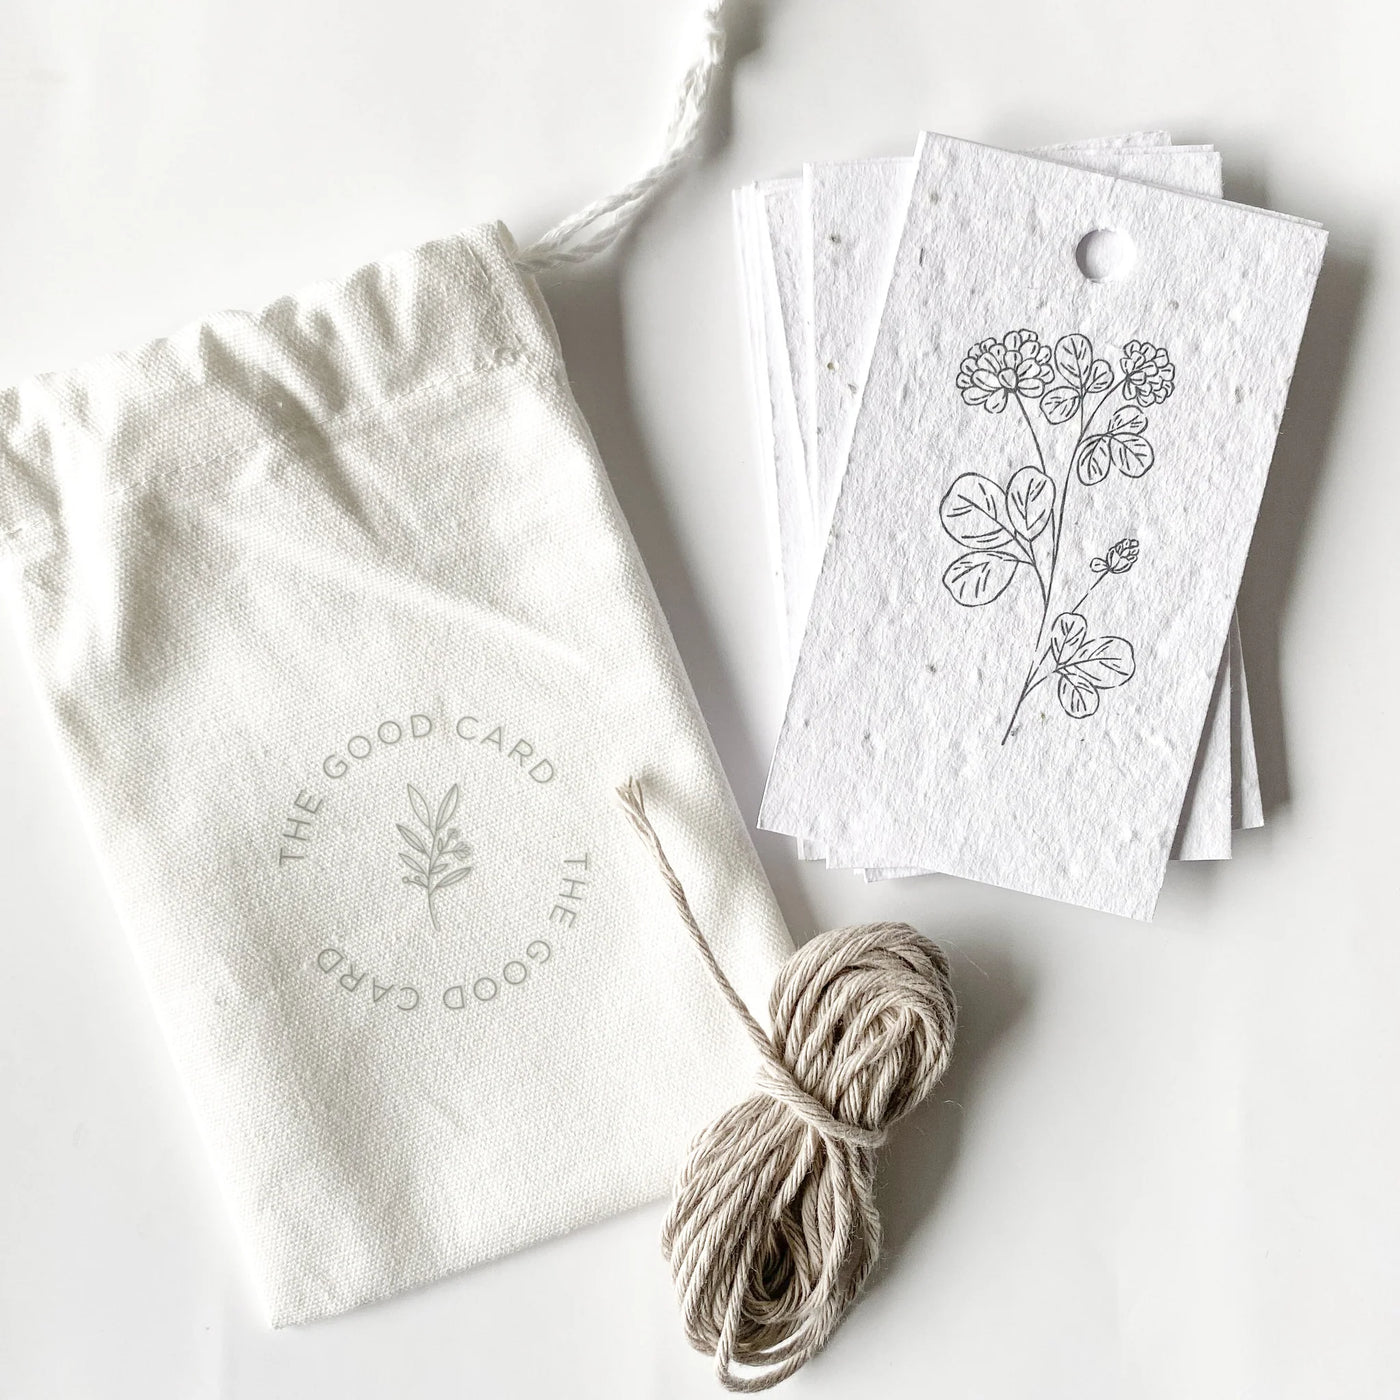 Plantable Gift Tags - Florals